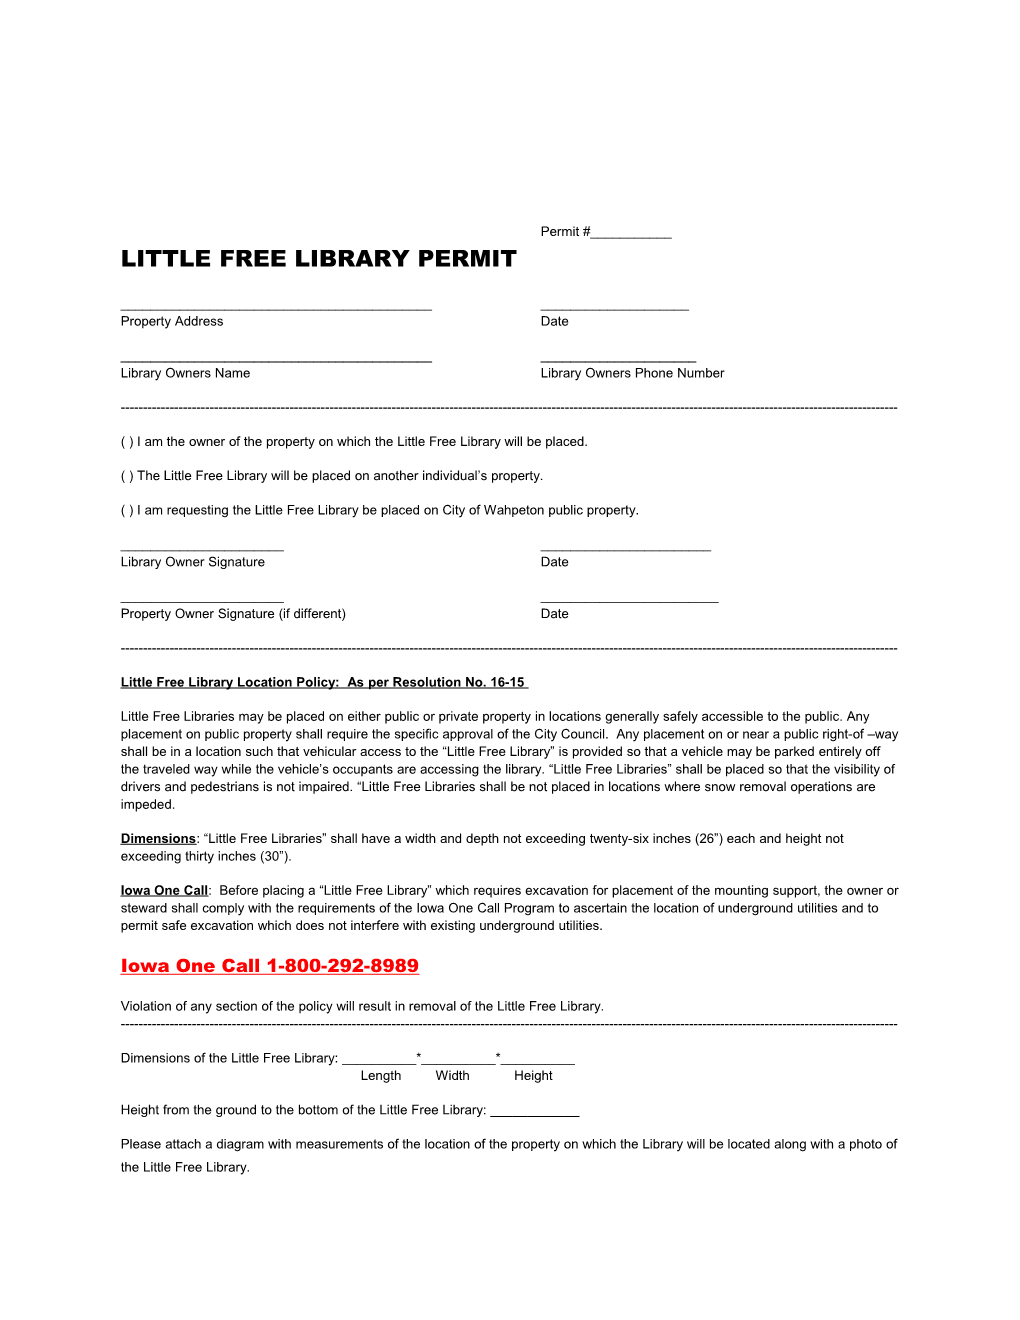 Little Free Library Permit